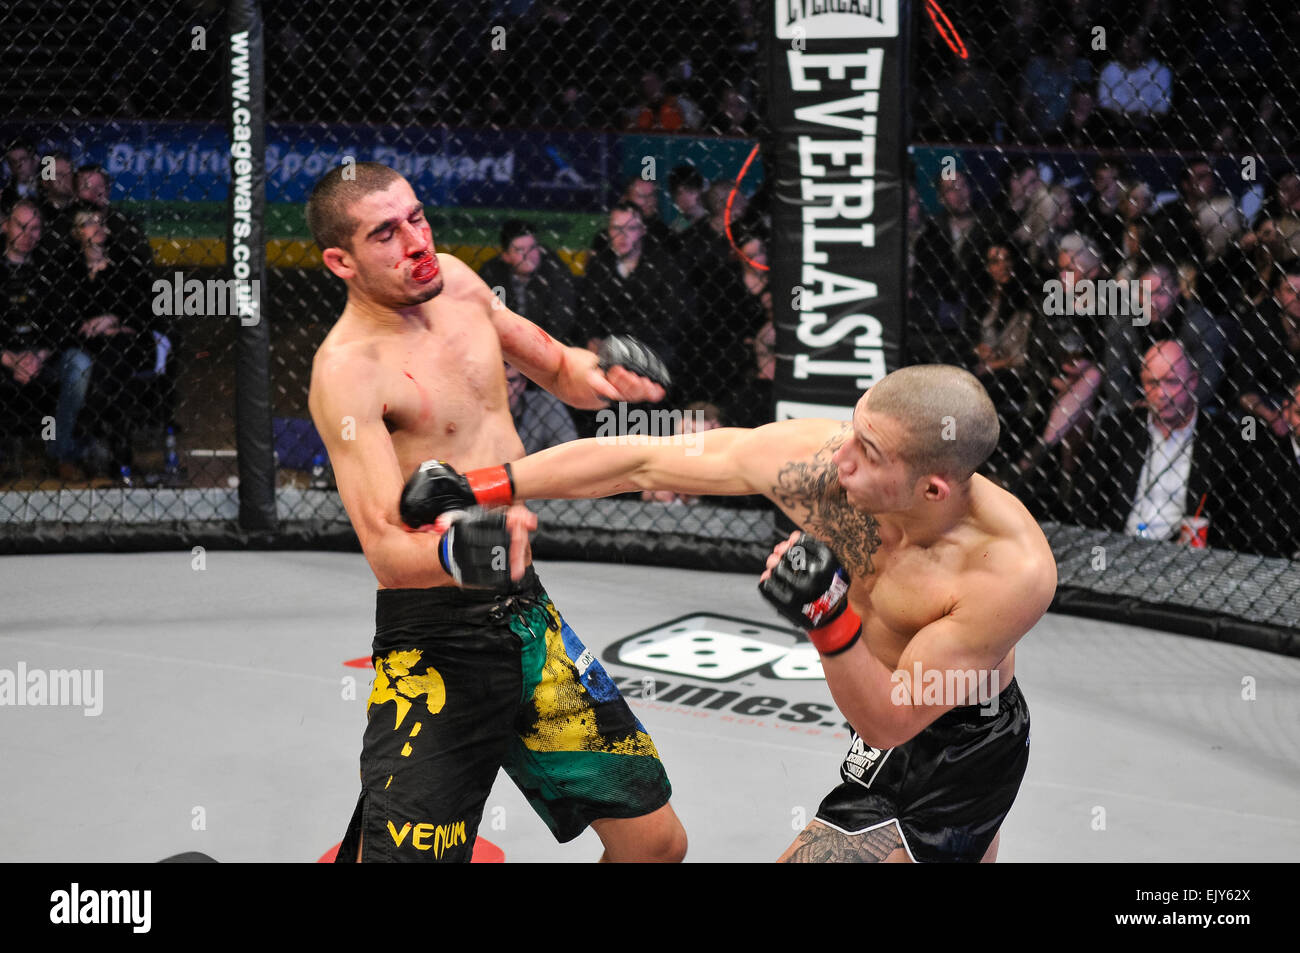 MMA cage figher punches his opponent in the nose, breaking it. Stock Photo